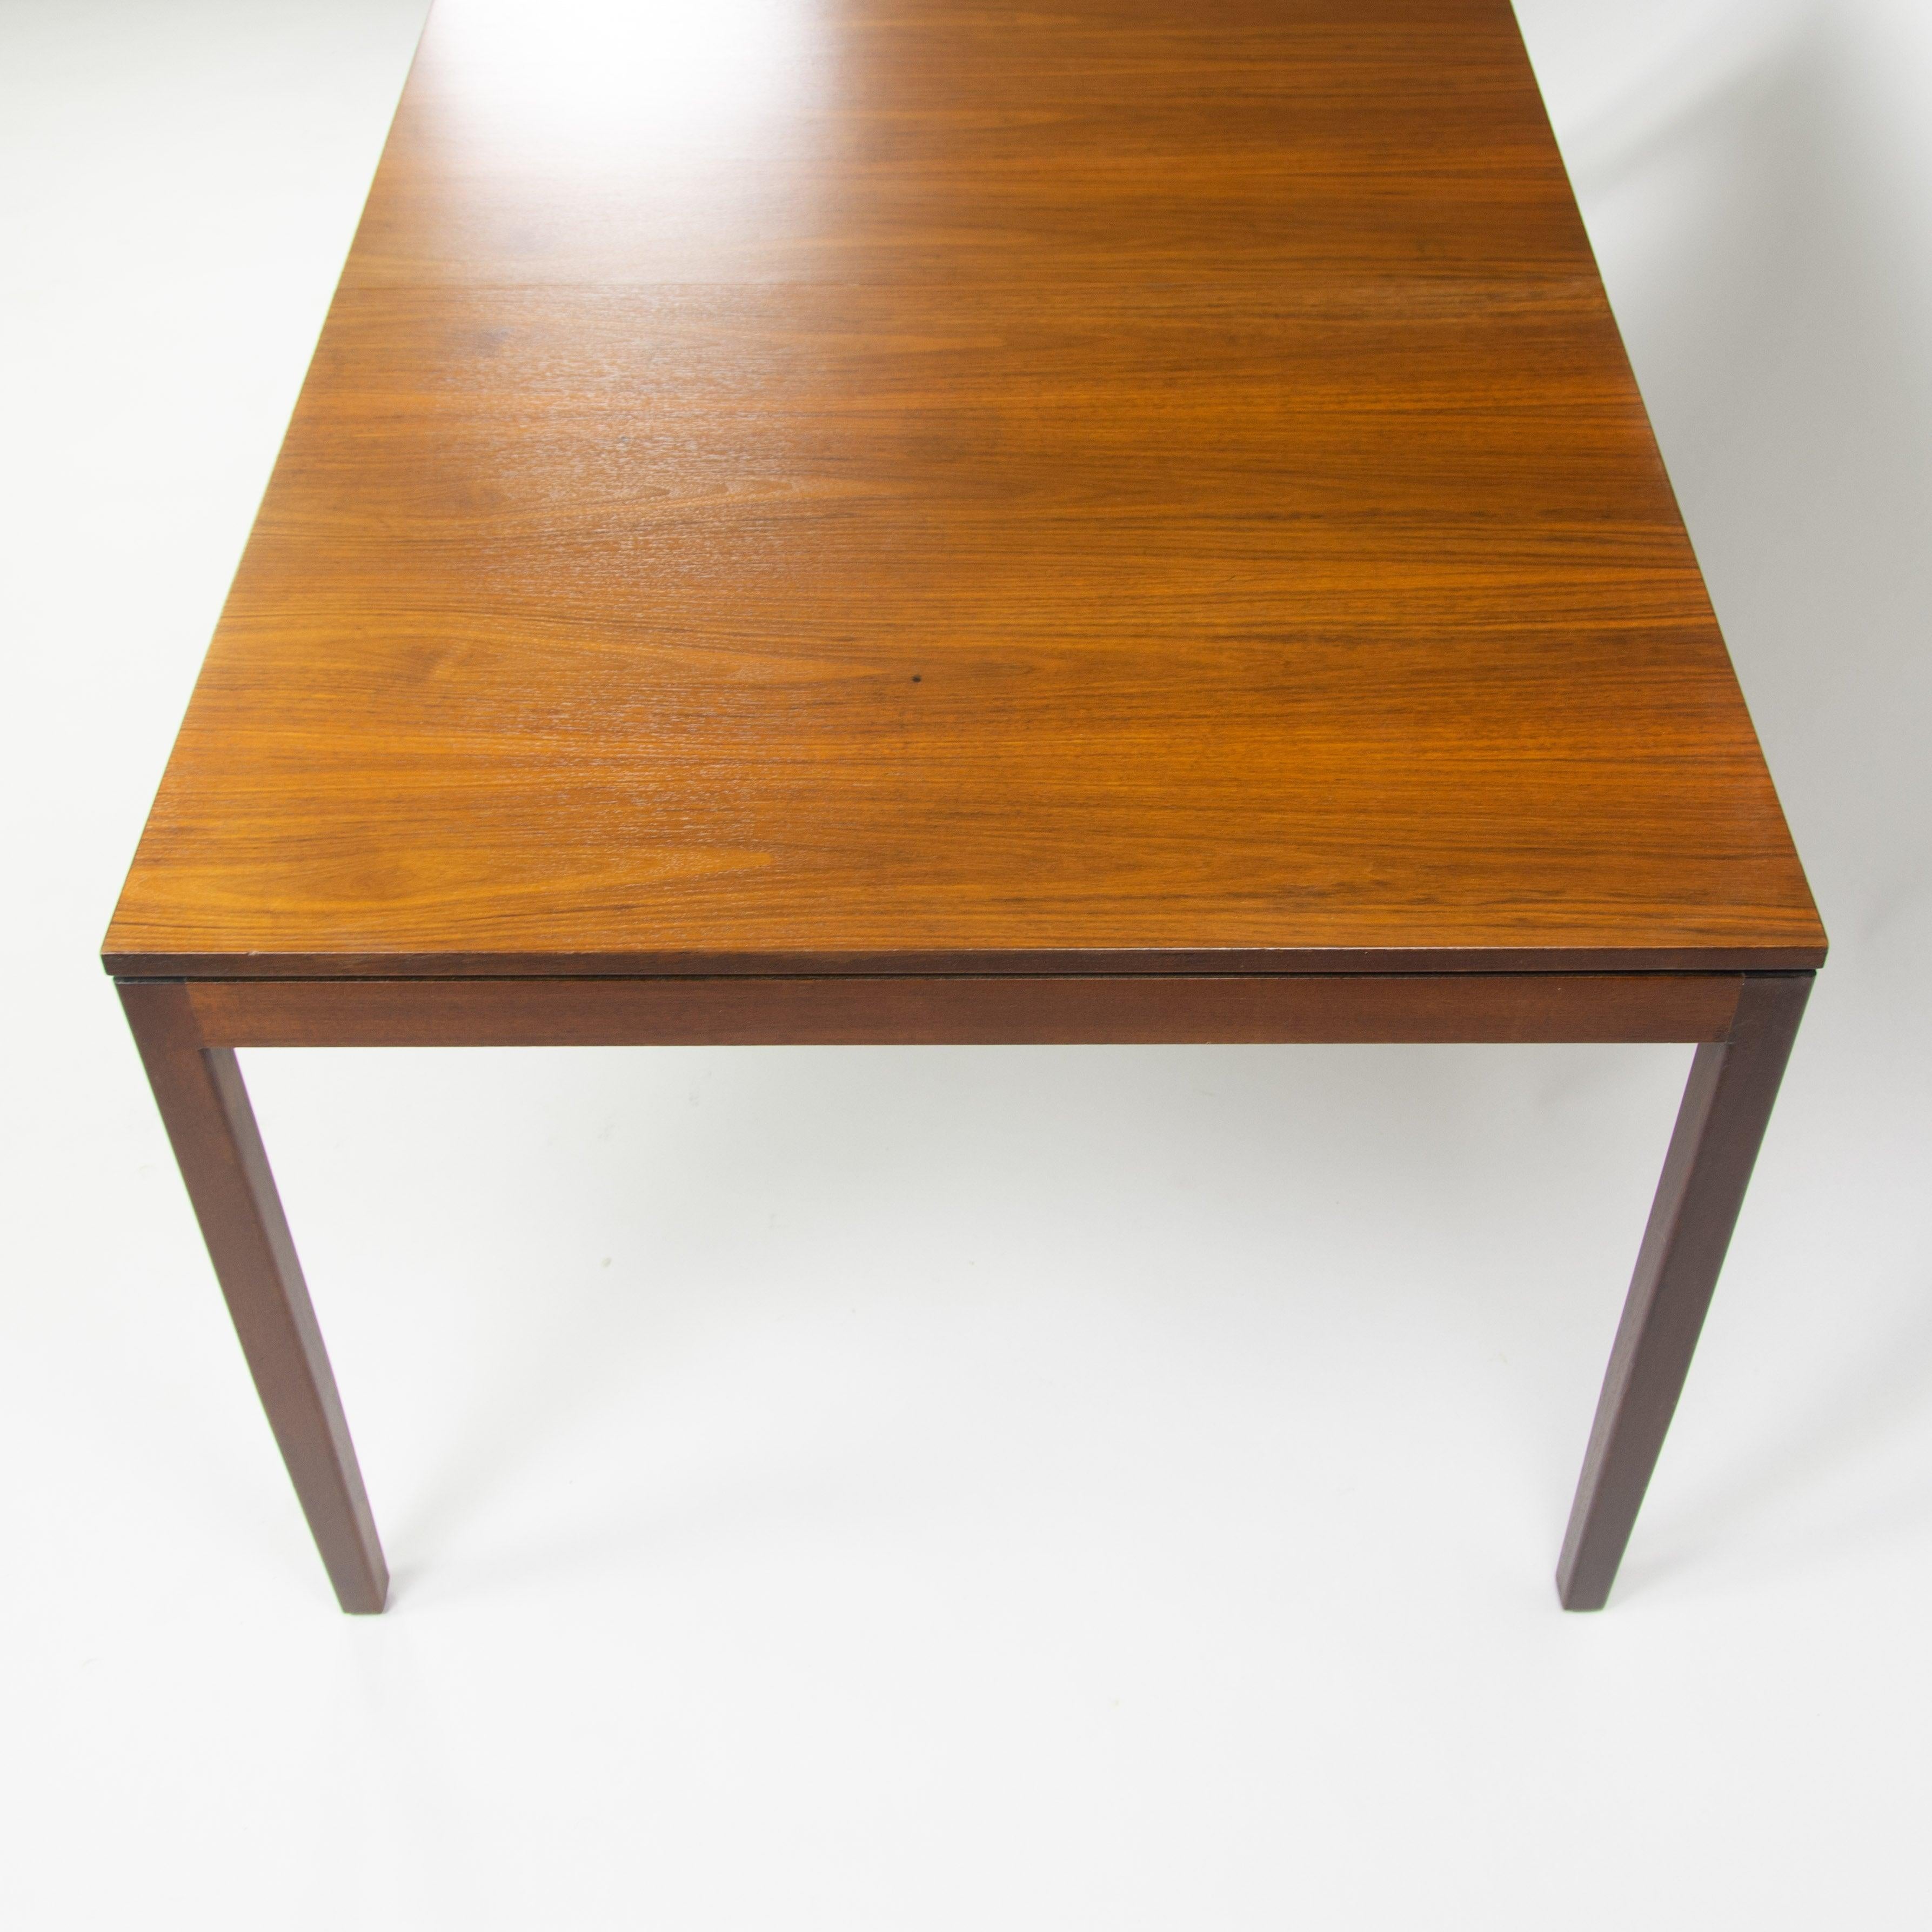 1950's Rare Original Florence Knoll Walnut Dining Table w/ Leaf 56-84 inches 4